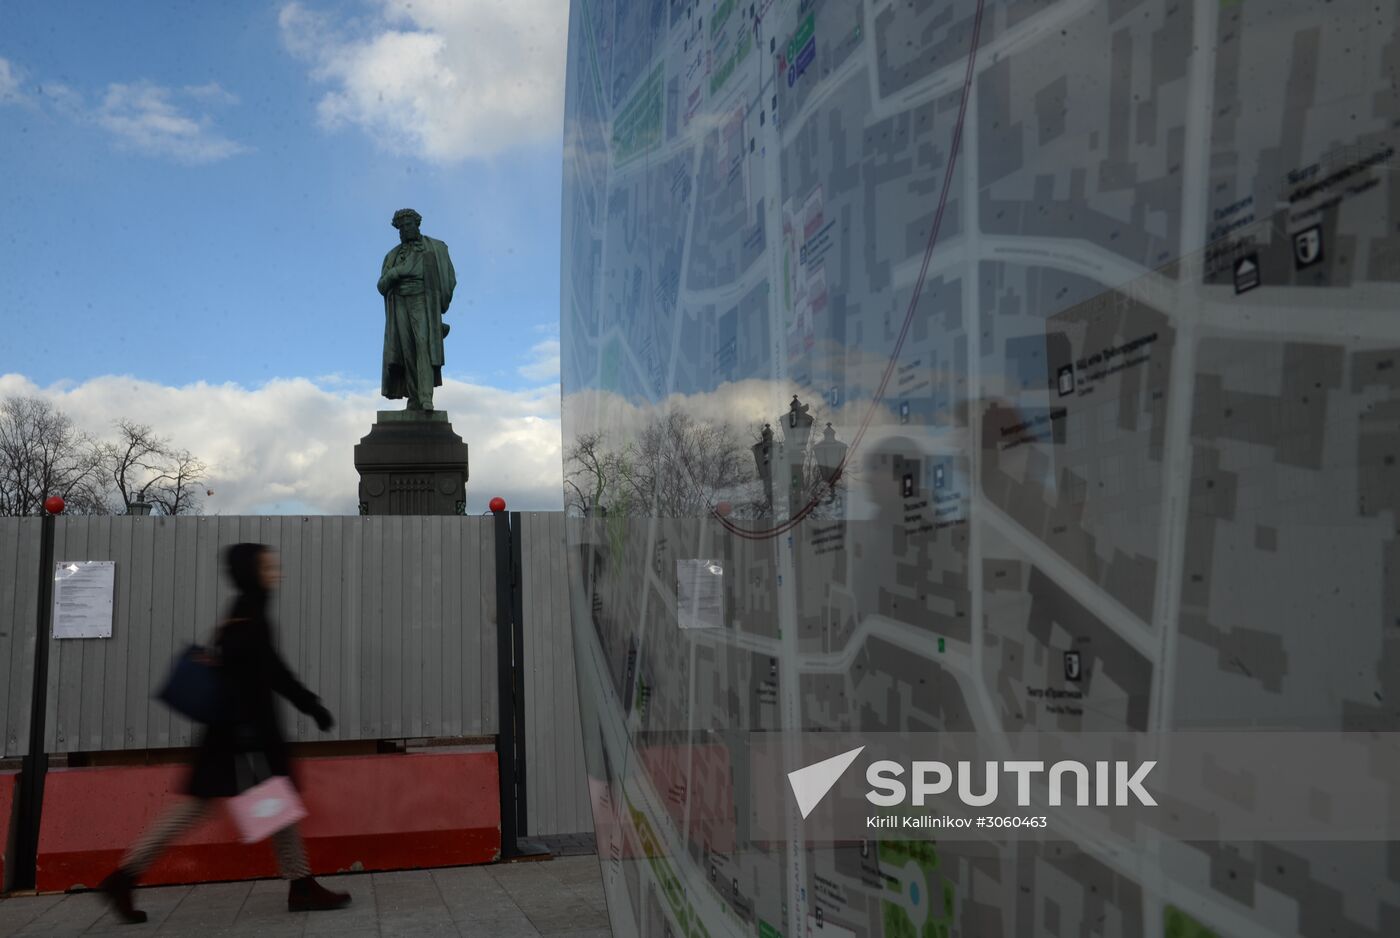 Renovation of Monument to Alexander Pushkin commences in Moscow